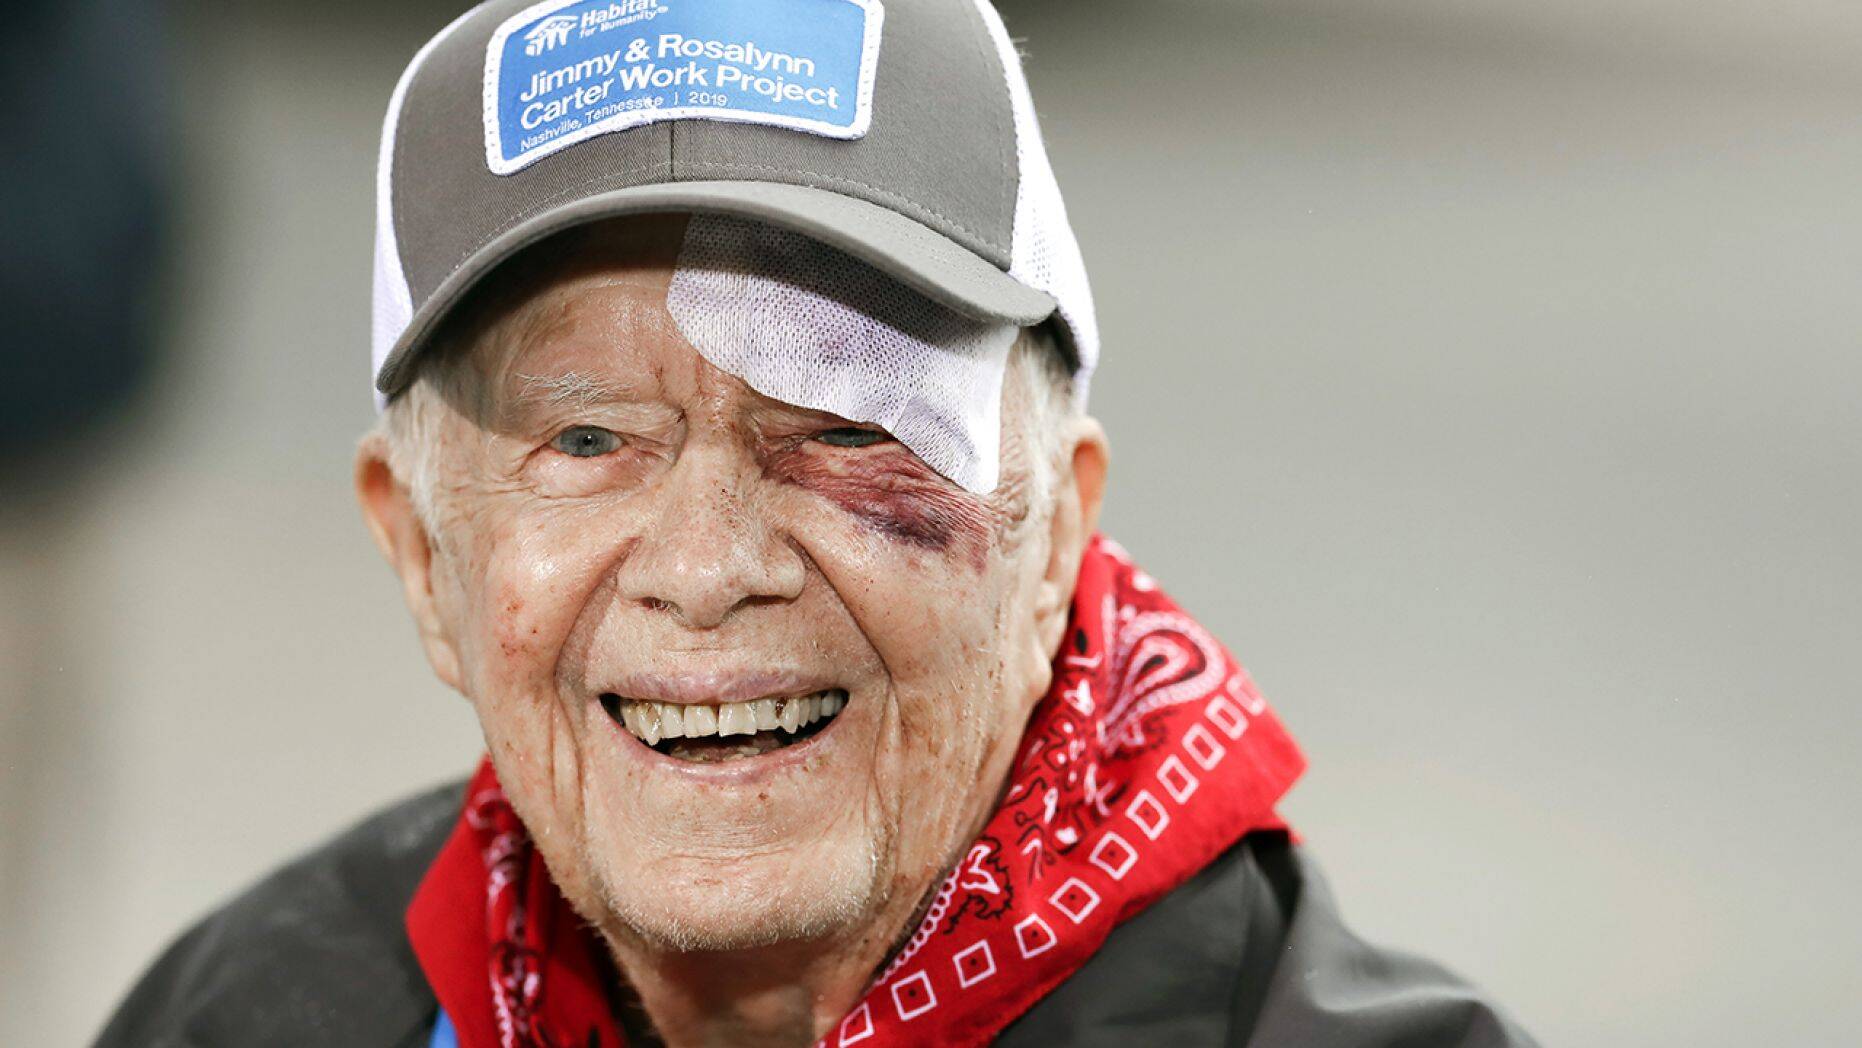 Despite a nasty fall, Jimmy Carter builds Habitat for Humanity homes in Tennessee